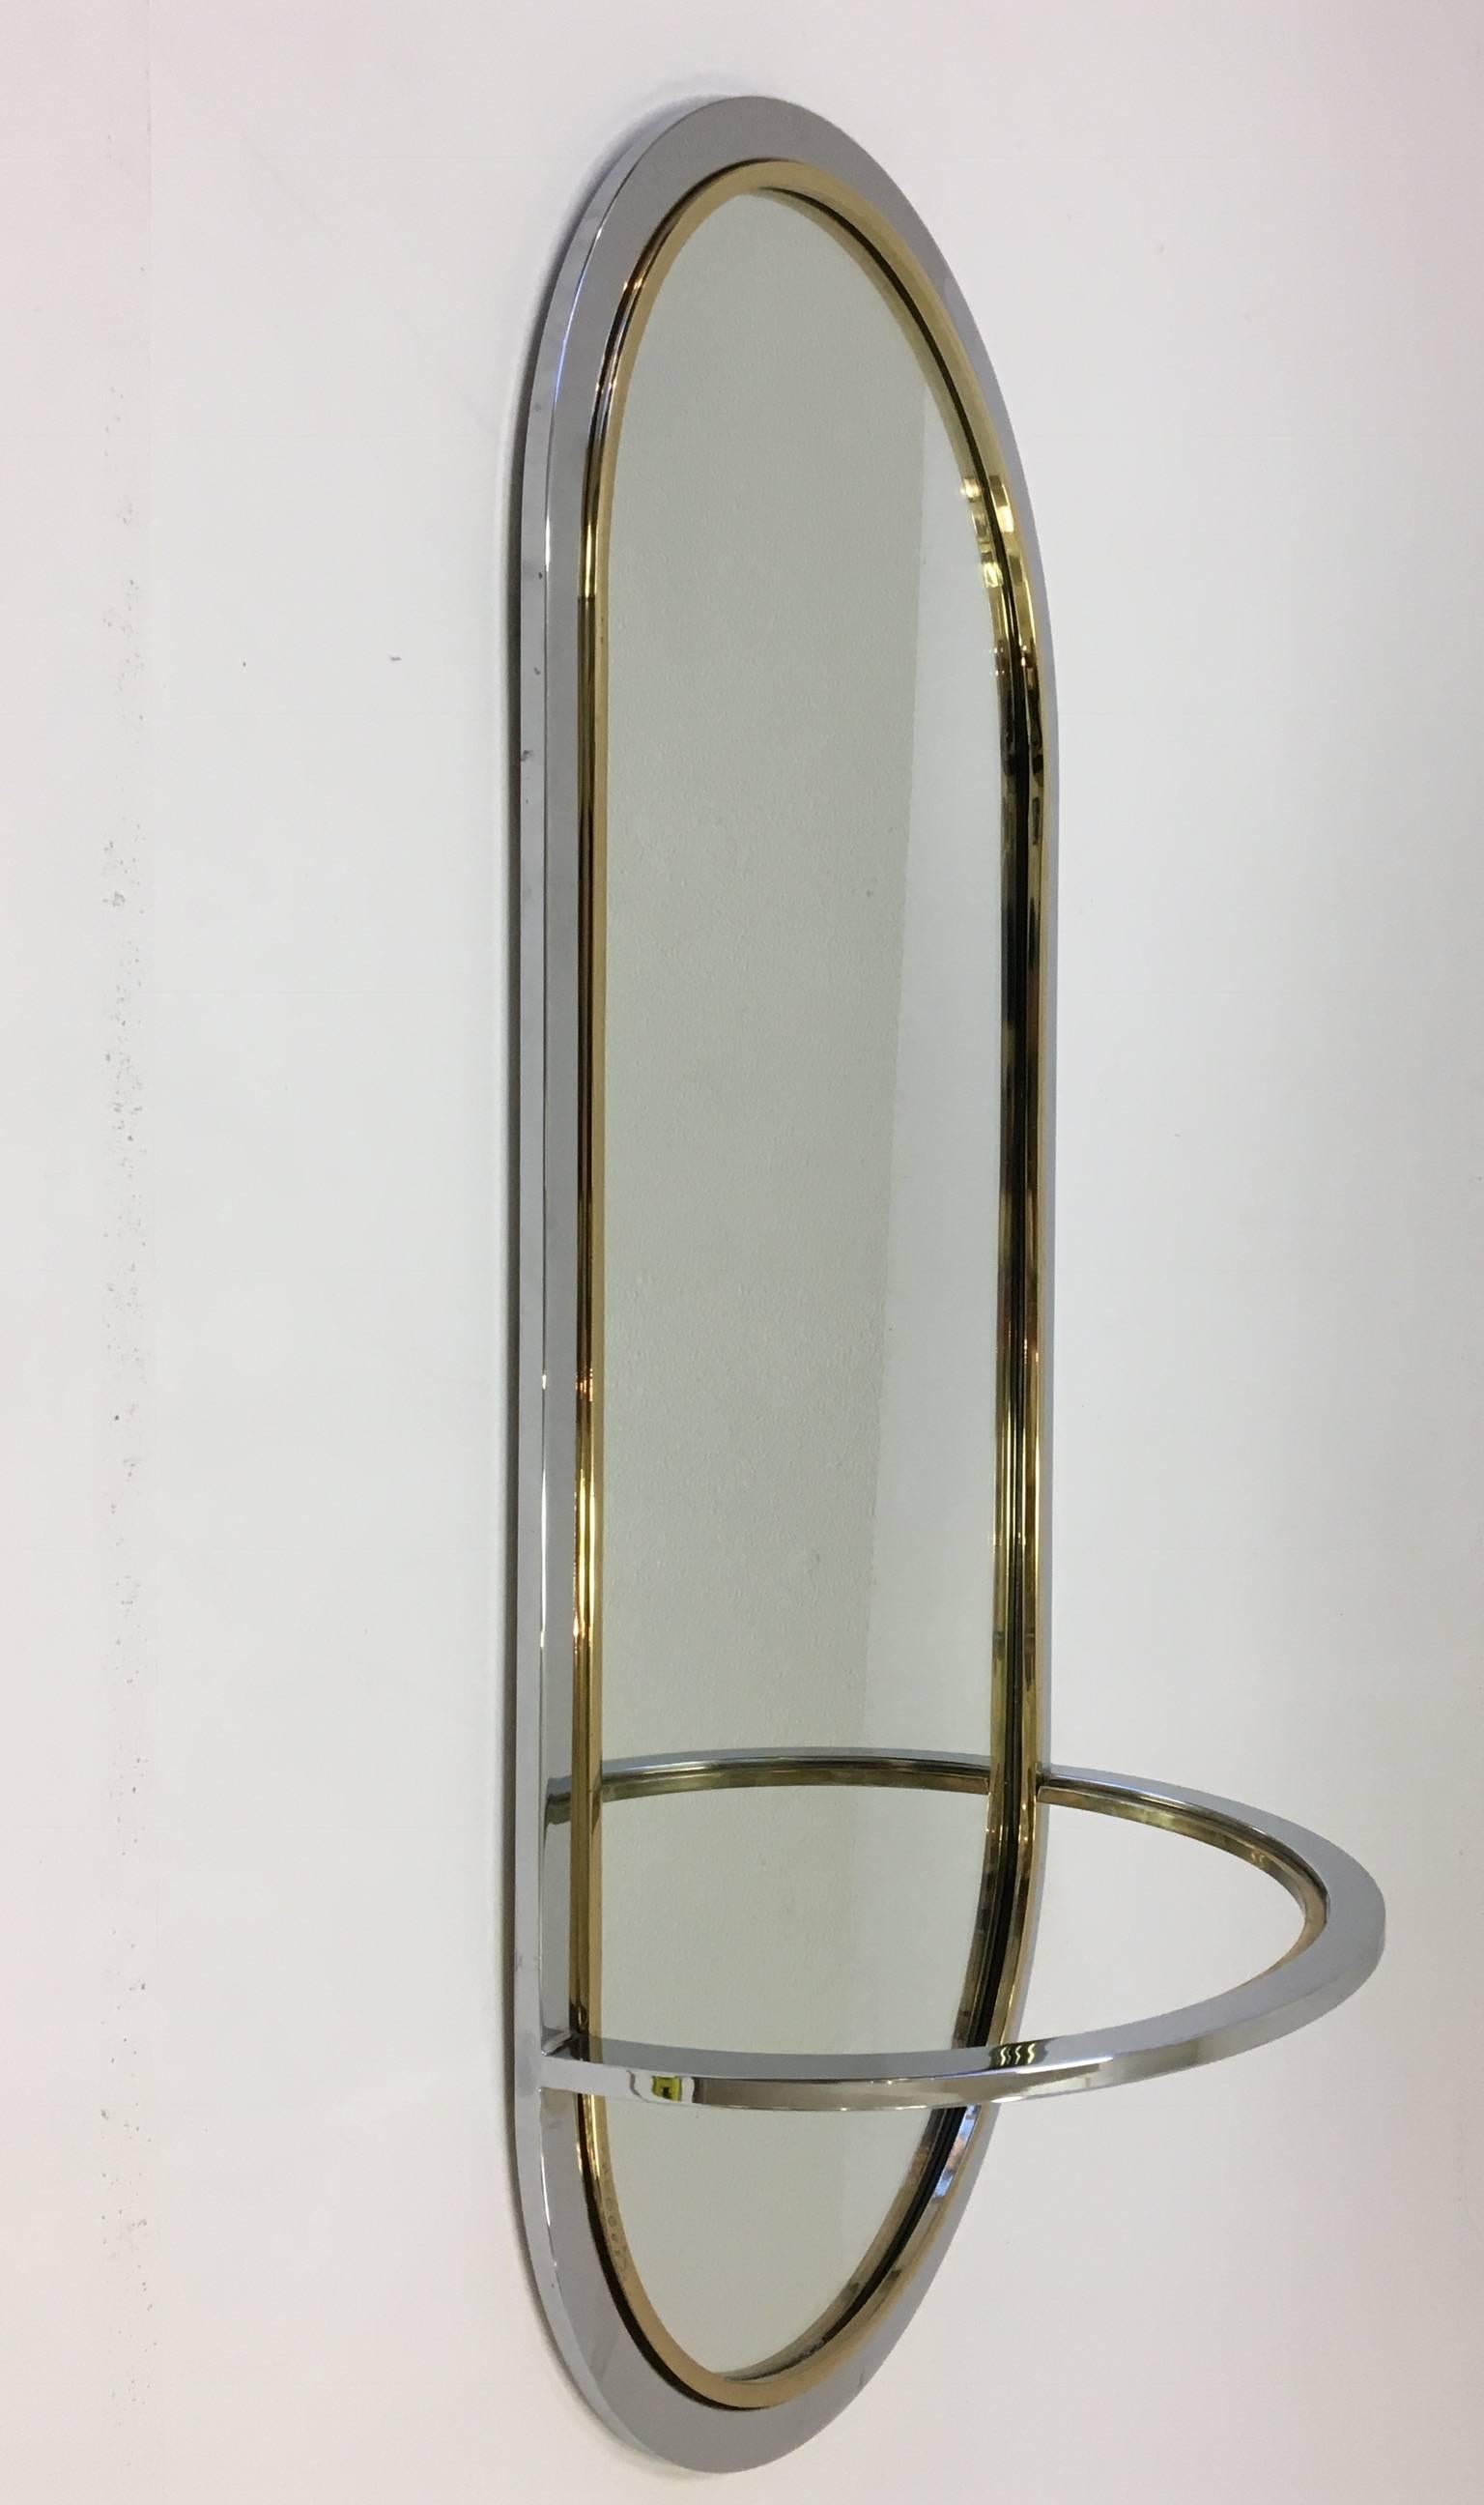 A glamorous chrome and brass race track wall mirror with a demilune shelf. Designed by Milo Baughman for Design Institute of America in the 1980s.
Dimensions: 24 inches high 20 inches wide 11 inches deep.